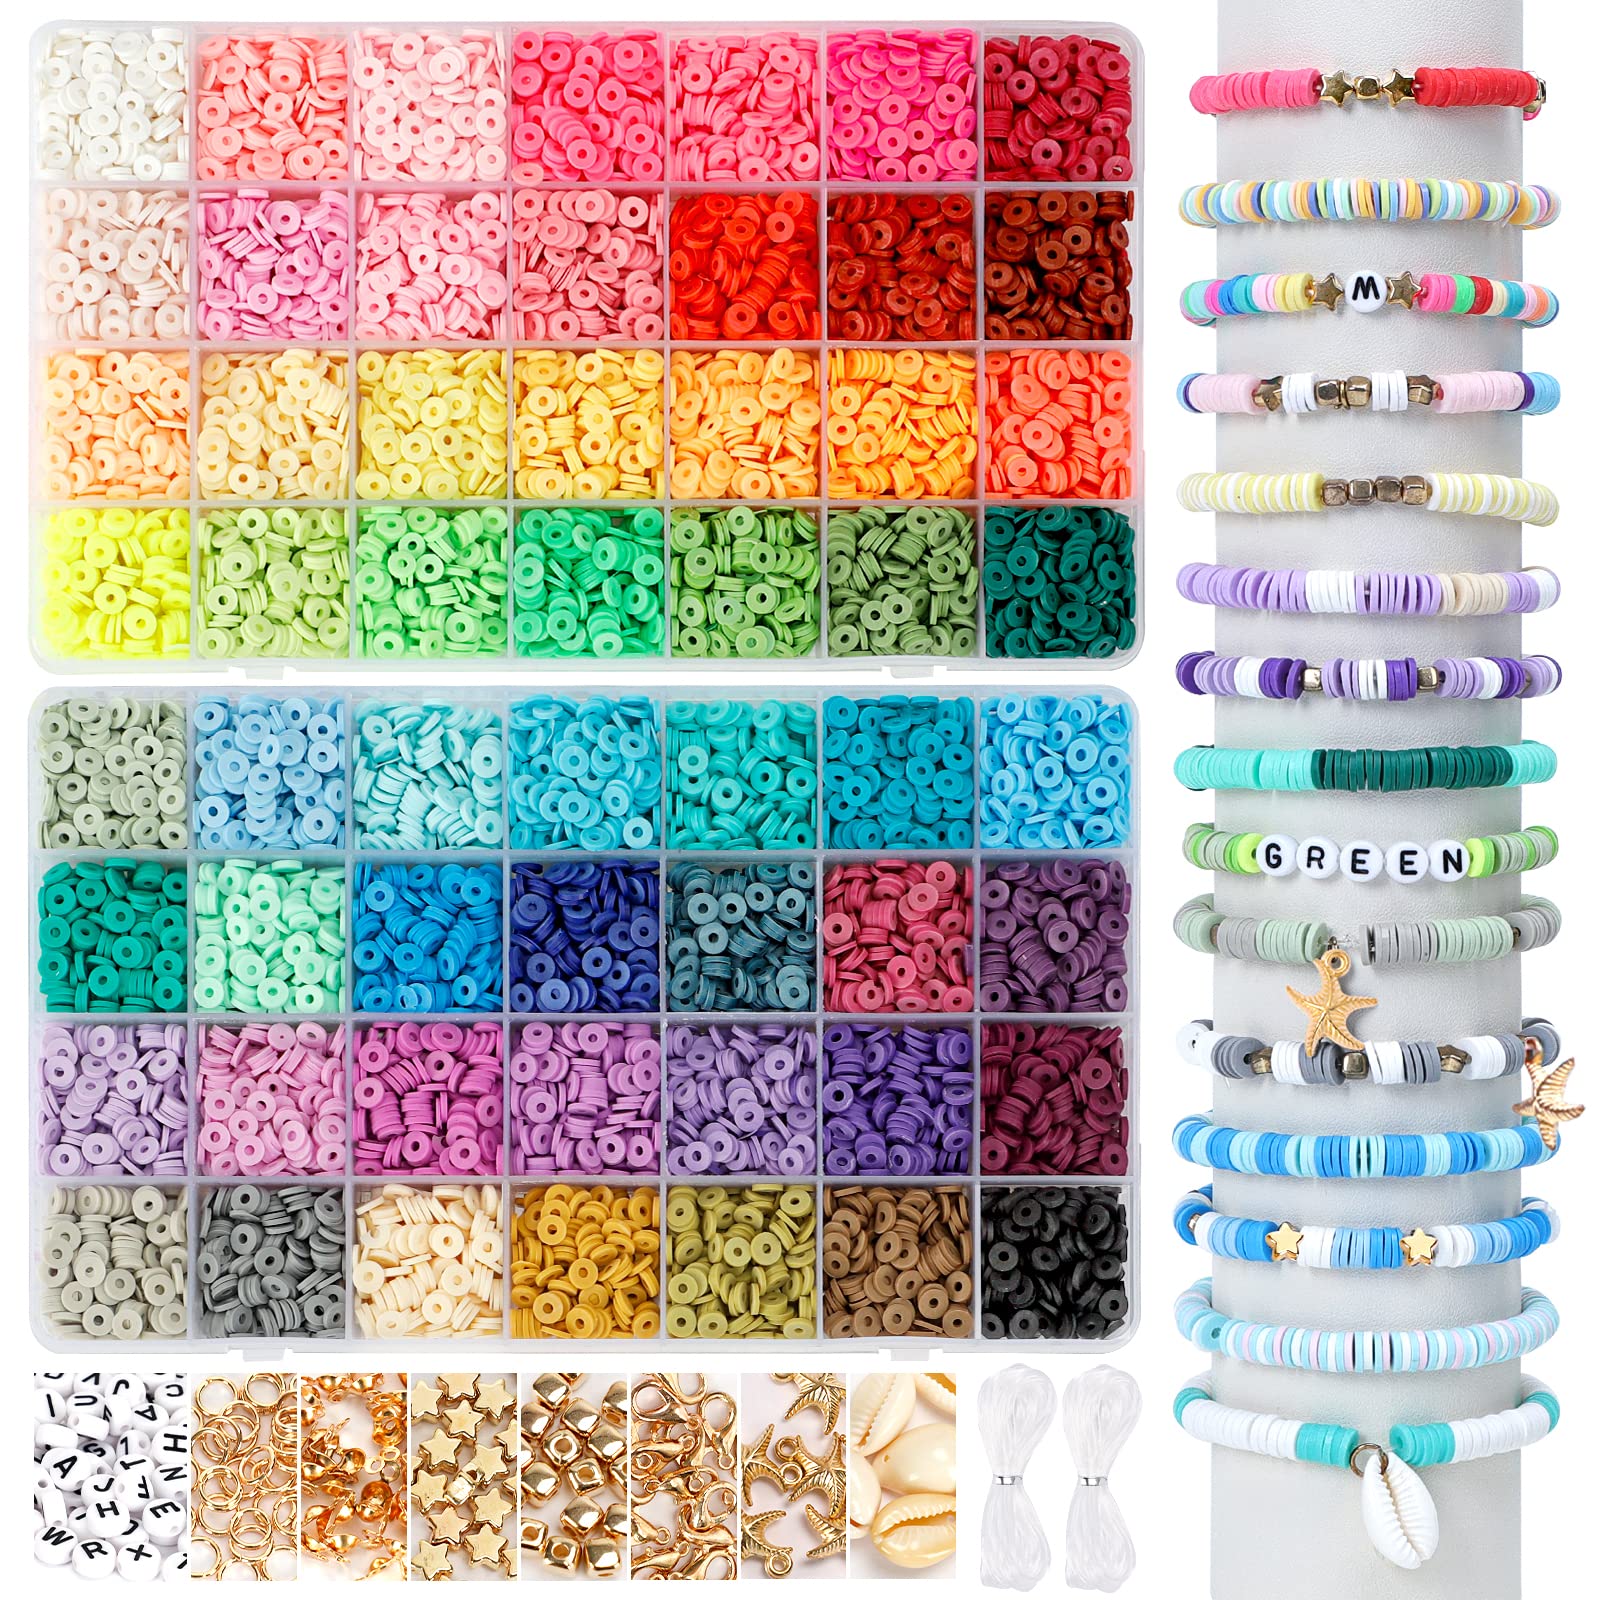 QUEFE 3250pcs Pony Beads Set, Friendship Bracelet Kit Kandi Beads 2400pcs  Rainbow Beads in 96 Colors, 800pcs Letter and Heart Beads with 20 Meter